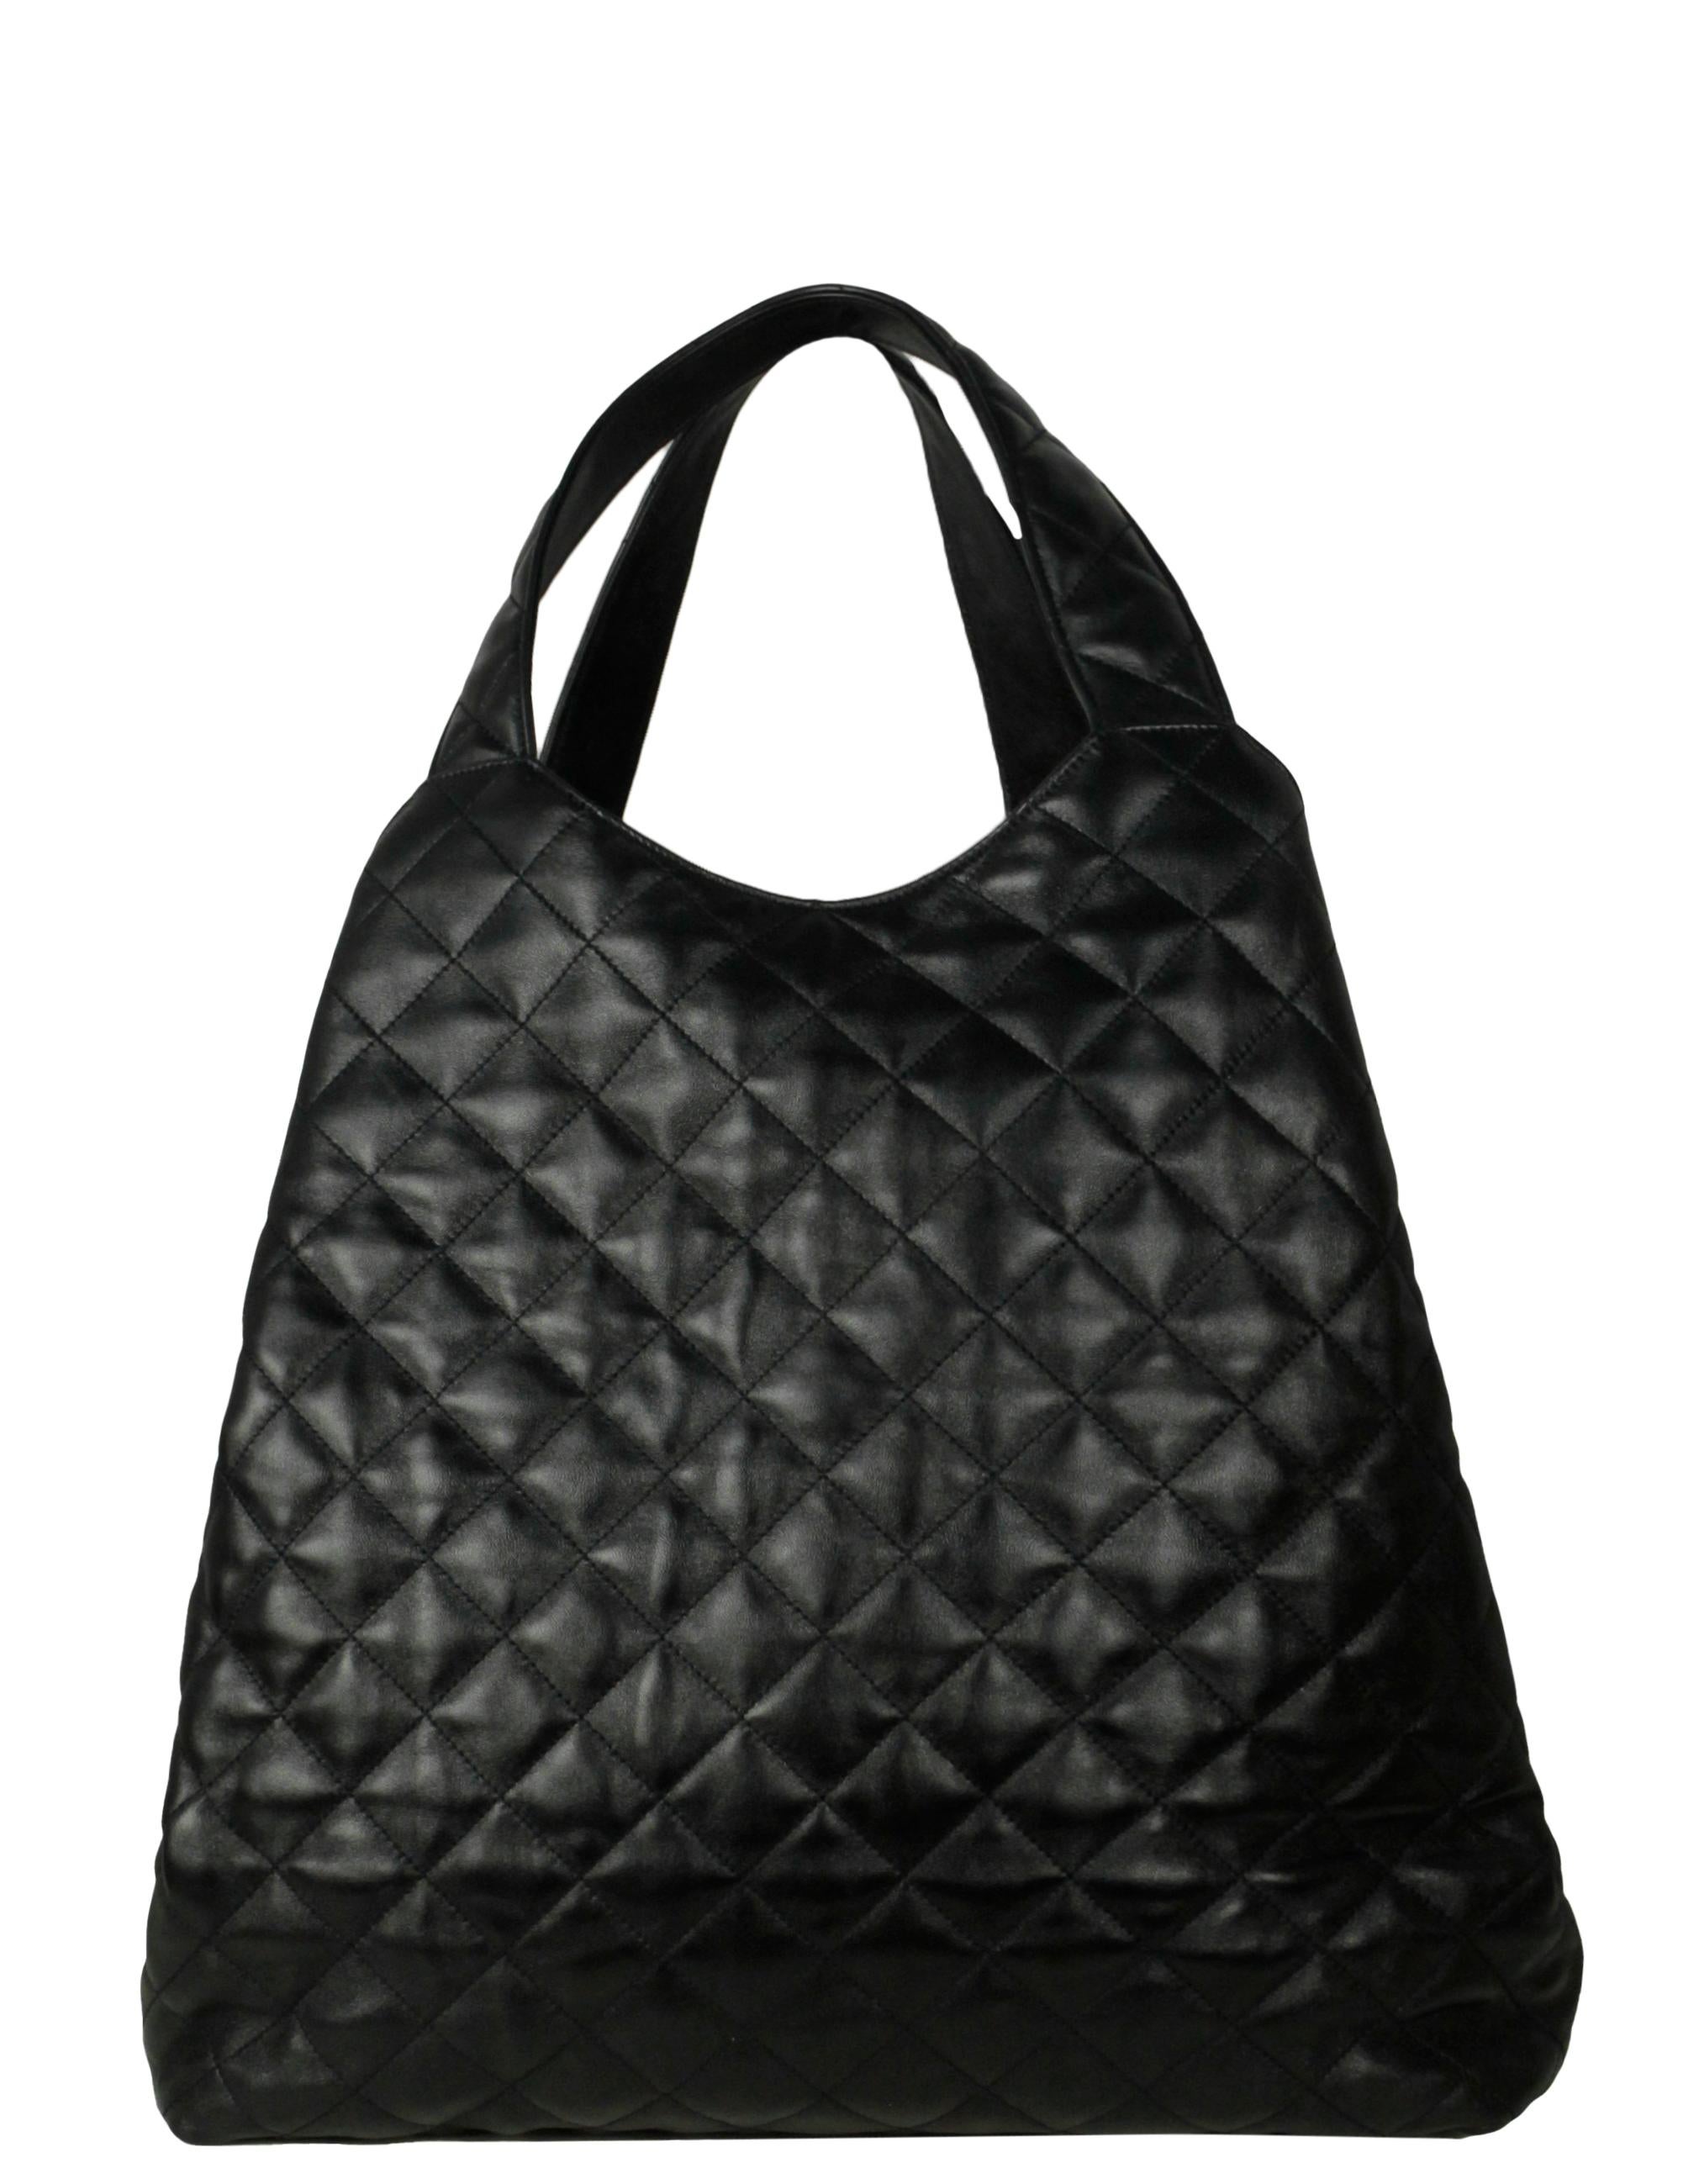 Women's Saint Laurent NEW Black Quilted Leather Icare Maxi Shopping Tote Bag